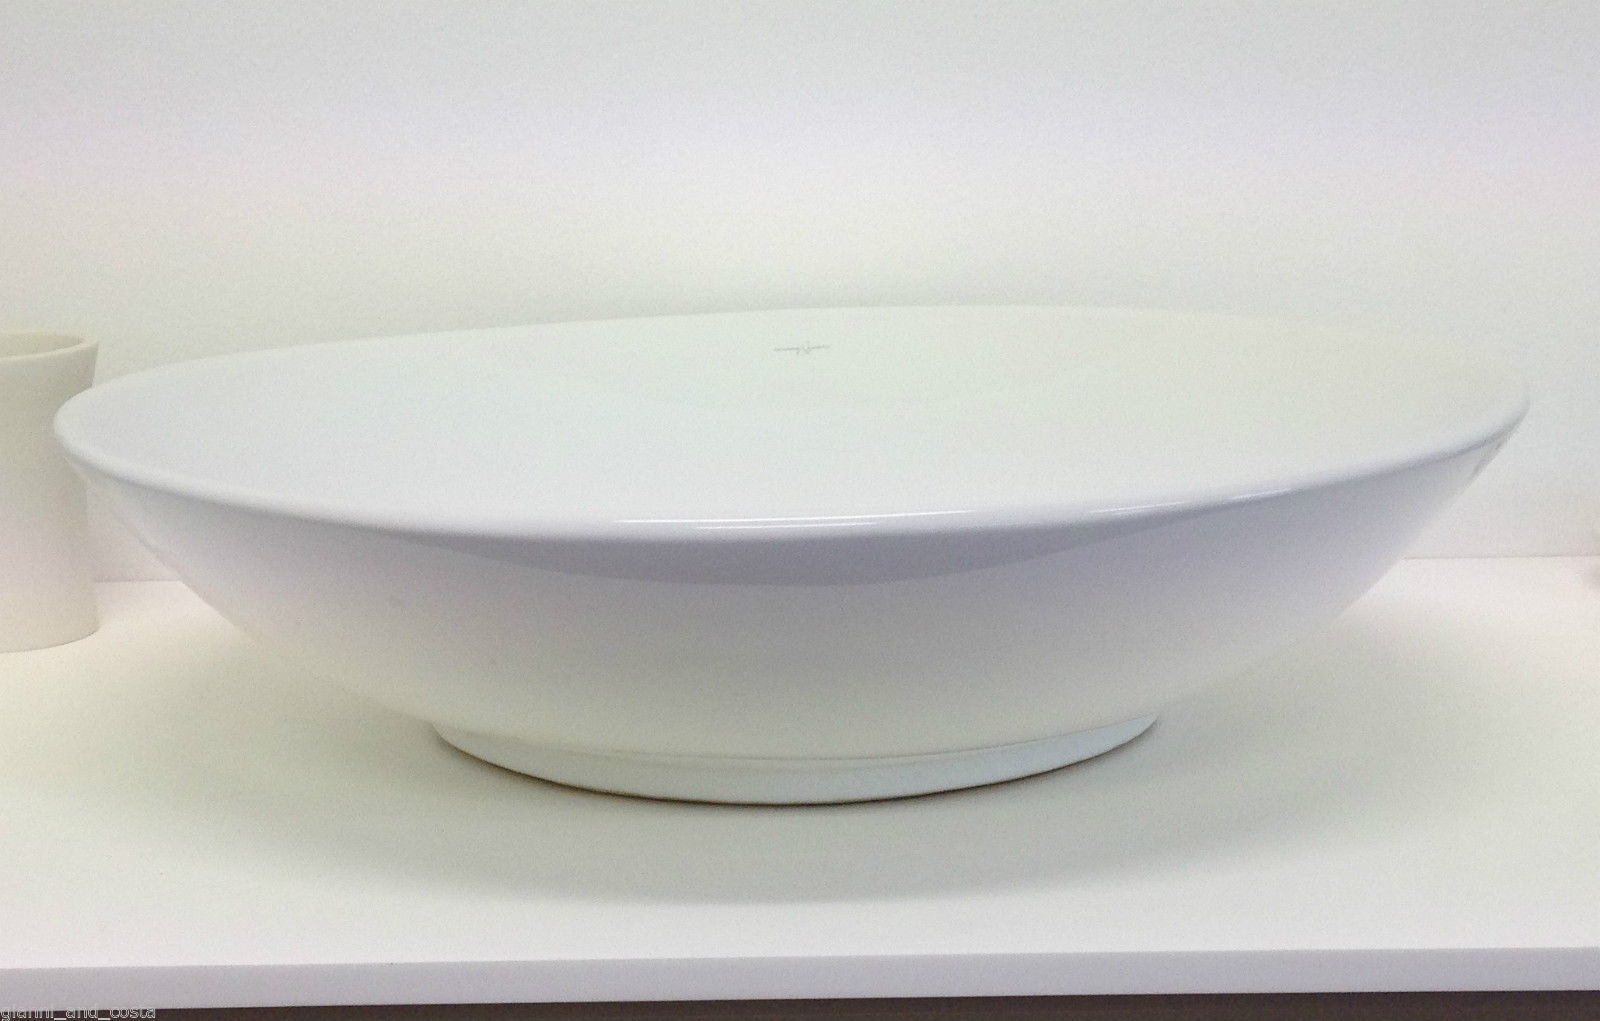 CERAMIC OVAL ABOVE COUNTER TOP BASIN FOR VANITY INCLUDES POP - UP WASTE